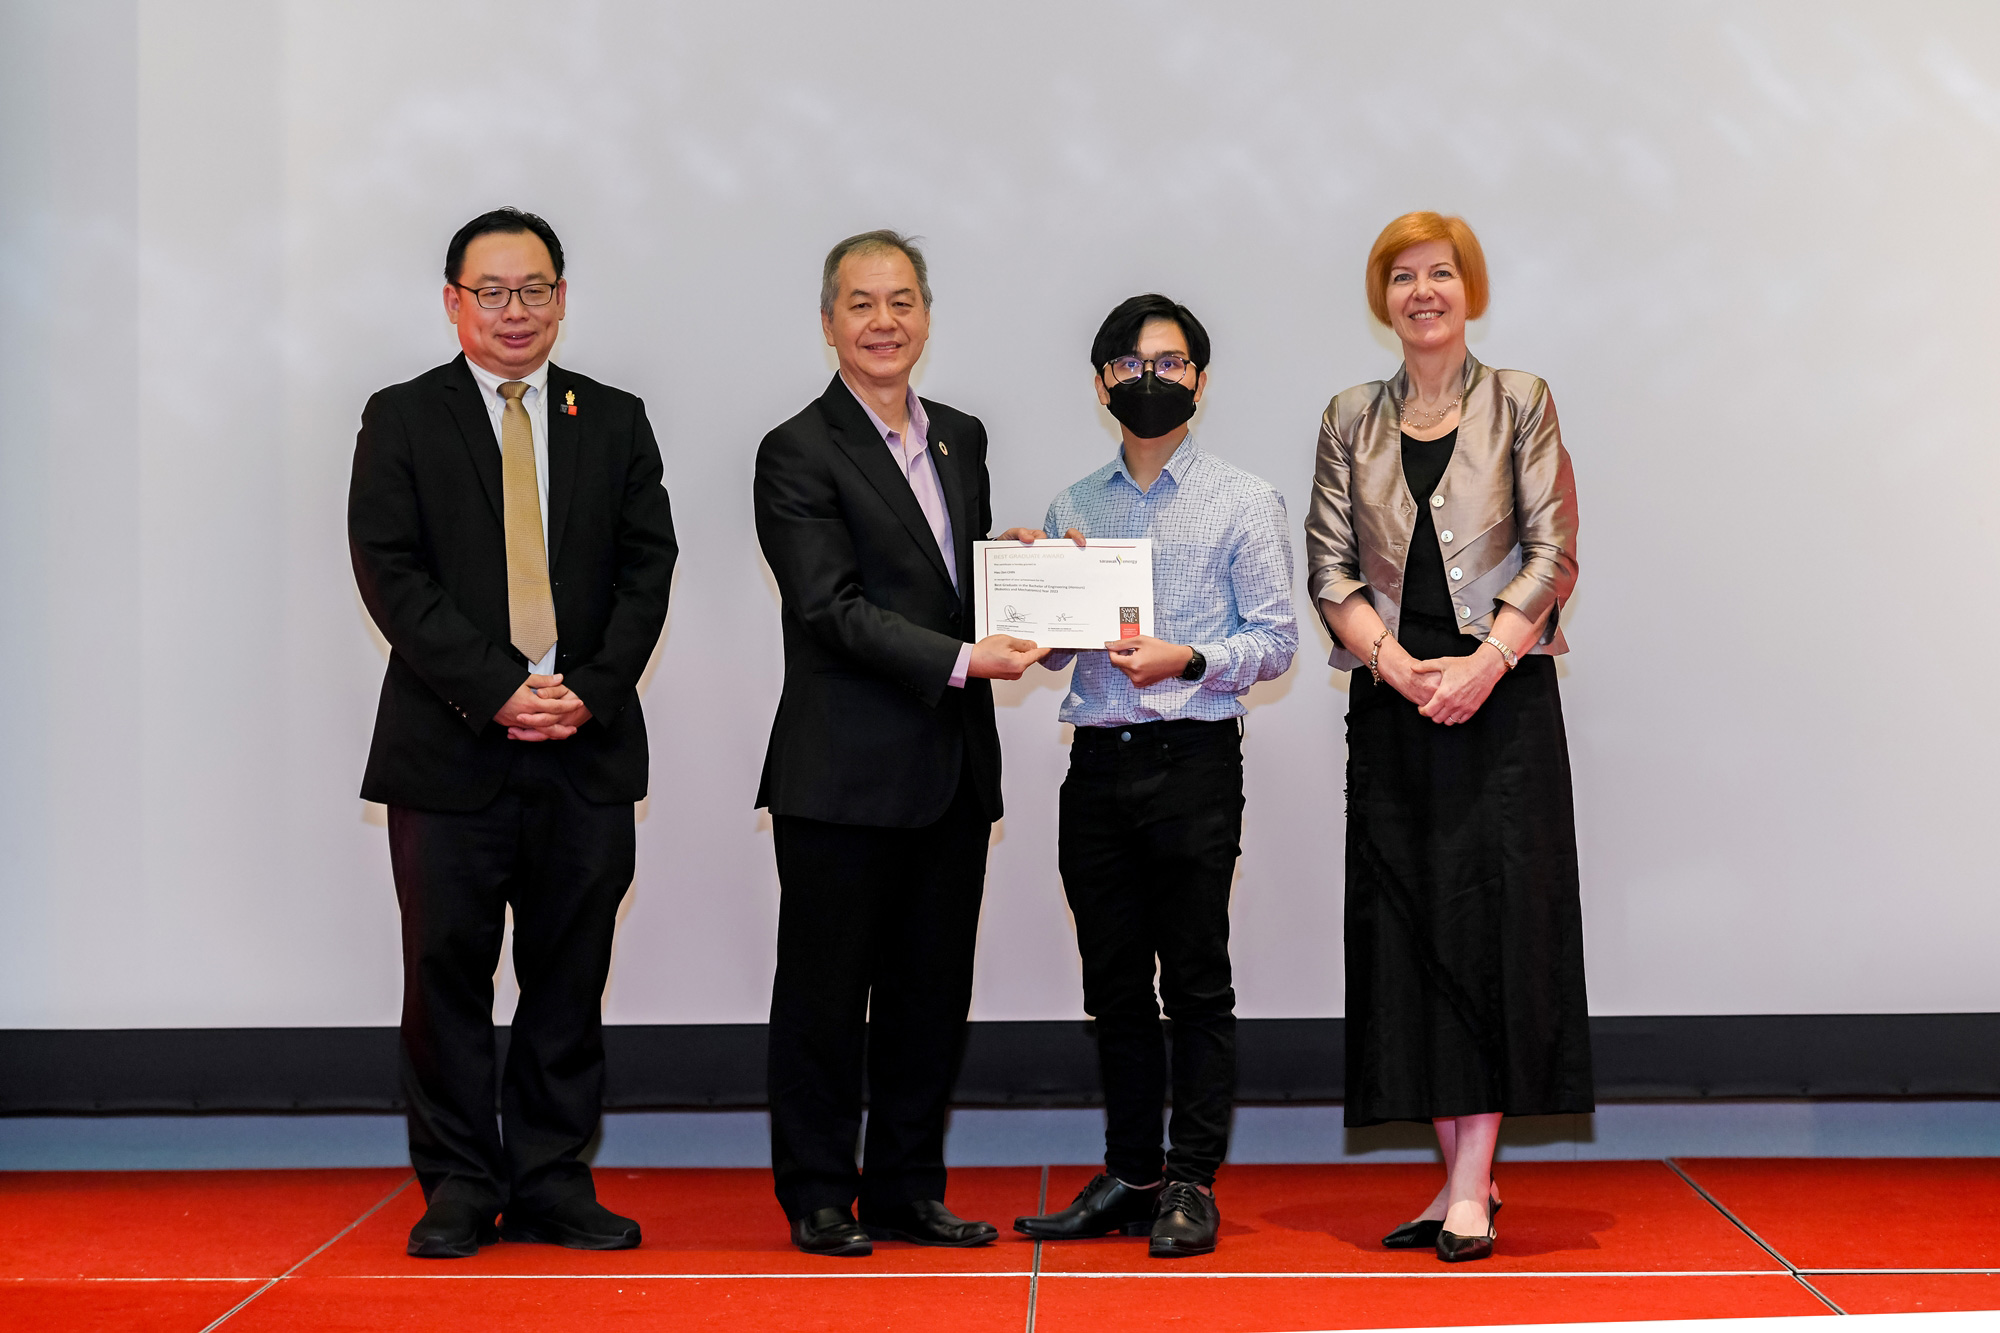 Chin Hau Zen (second right) receives the Best Graduate in Bachelor of Engineering (Robotics and Mechatronics) award from Mr James Ung, Group Chief Operating Officer and Swinburne Campus Ambassador of Sarawak Energy Berhad, witnessed by Ir Professor Lau Hieng Ho (left) and Professor Pascale Quester (right).